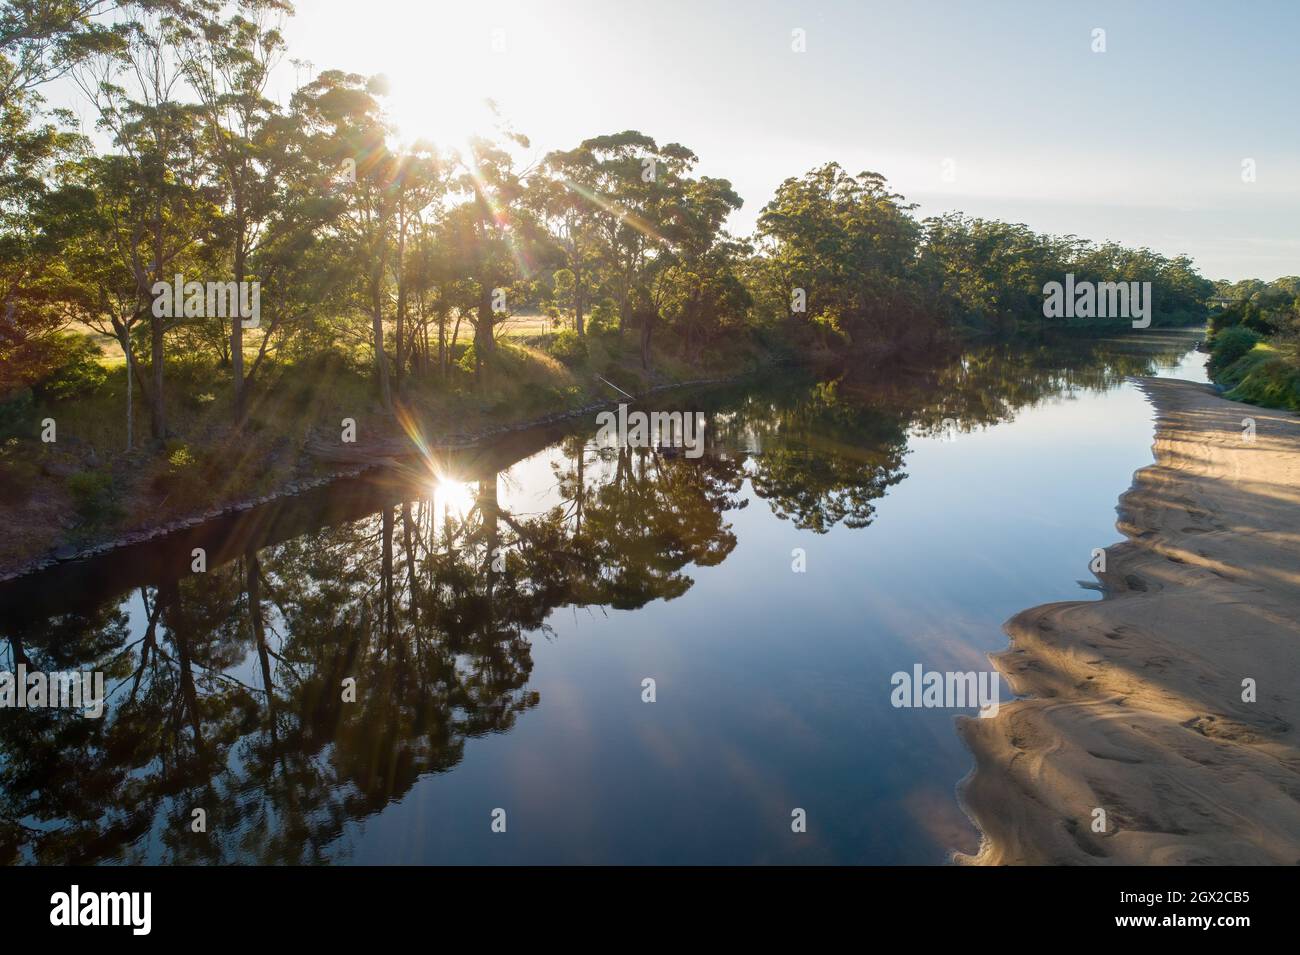 Sunset Over Trees Growing On Snowy River Banks In Orbost, Australia Stock Photo